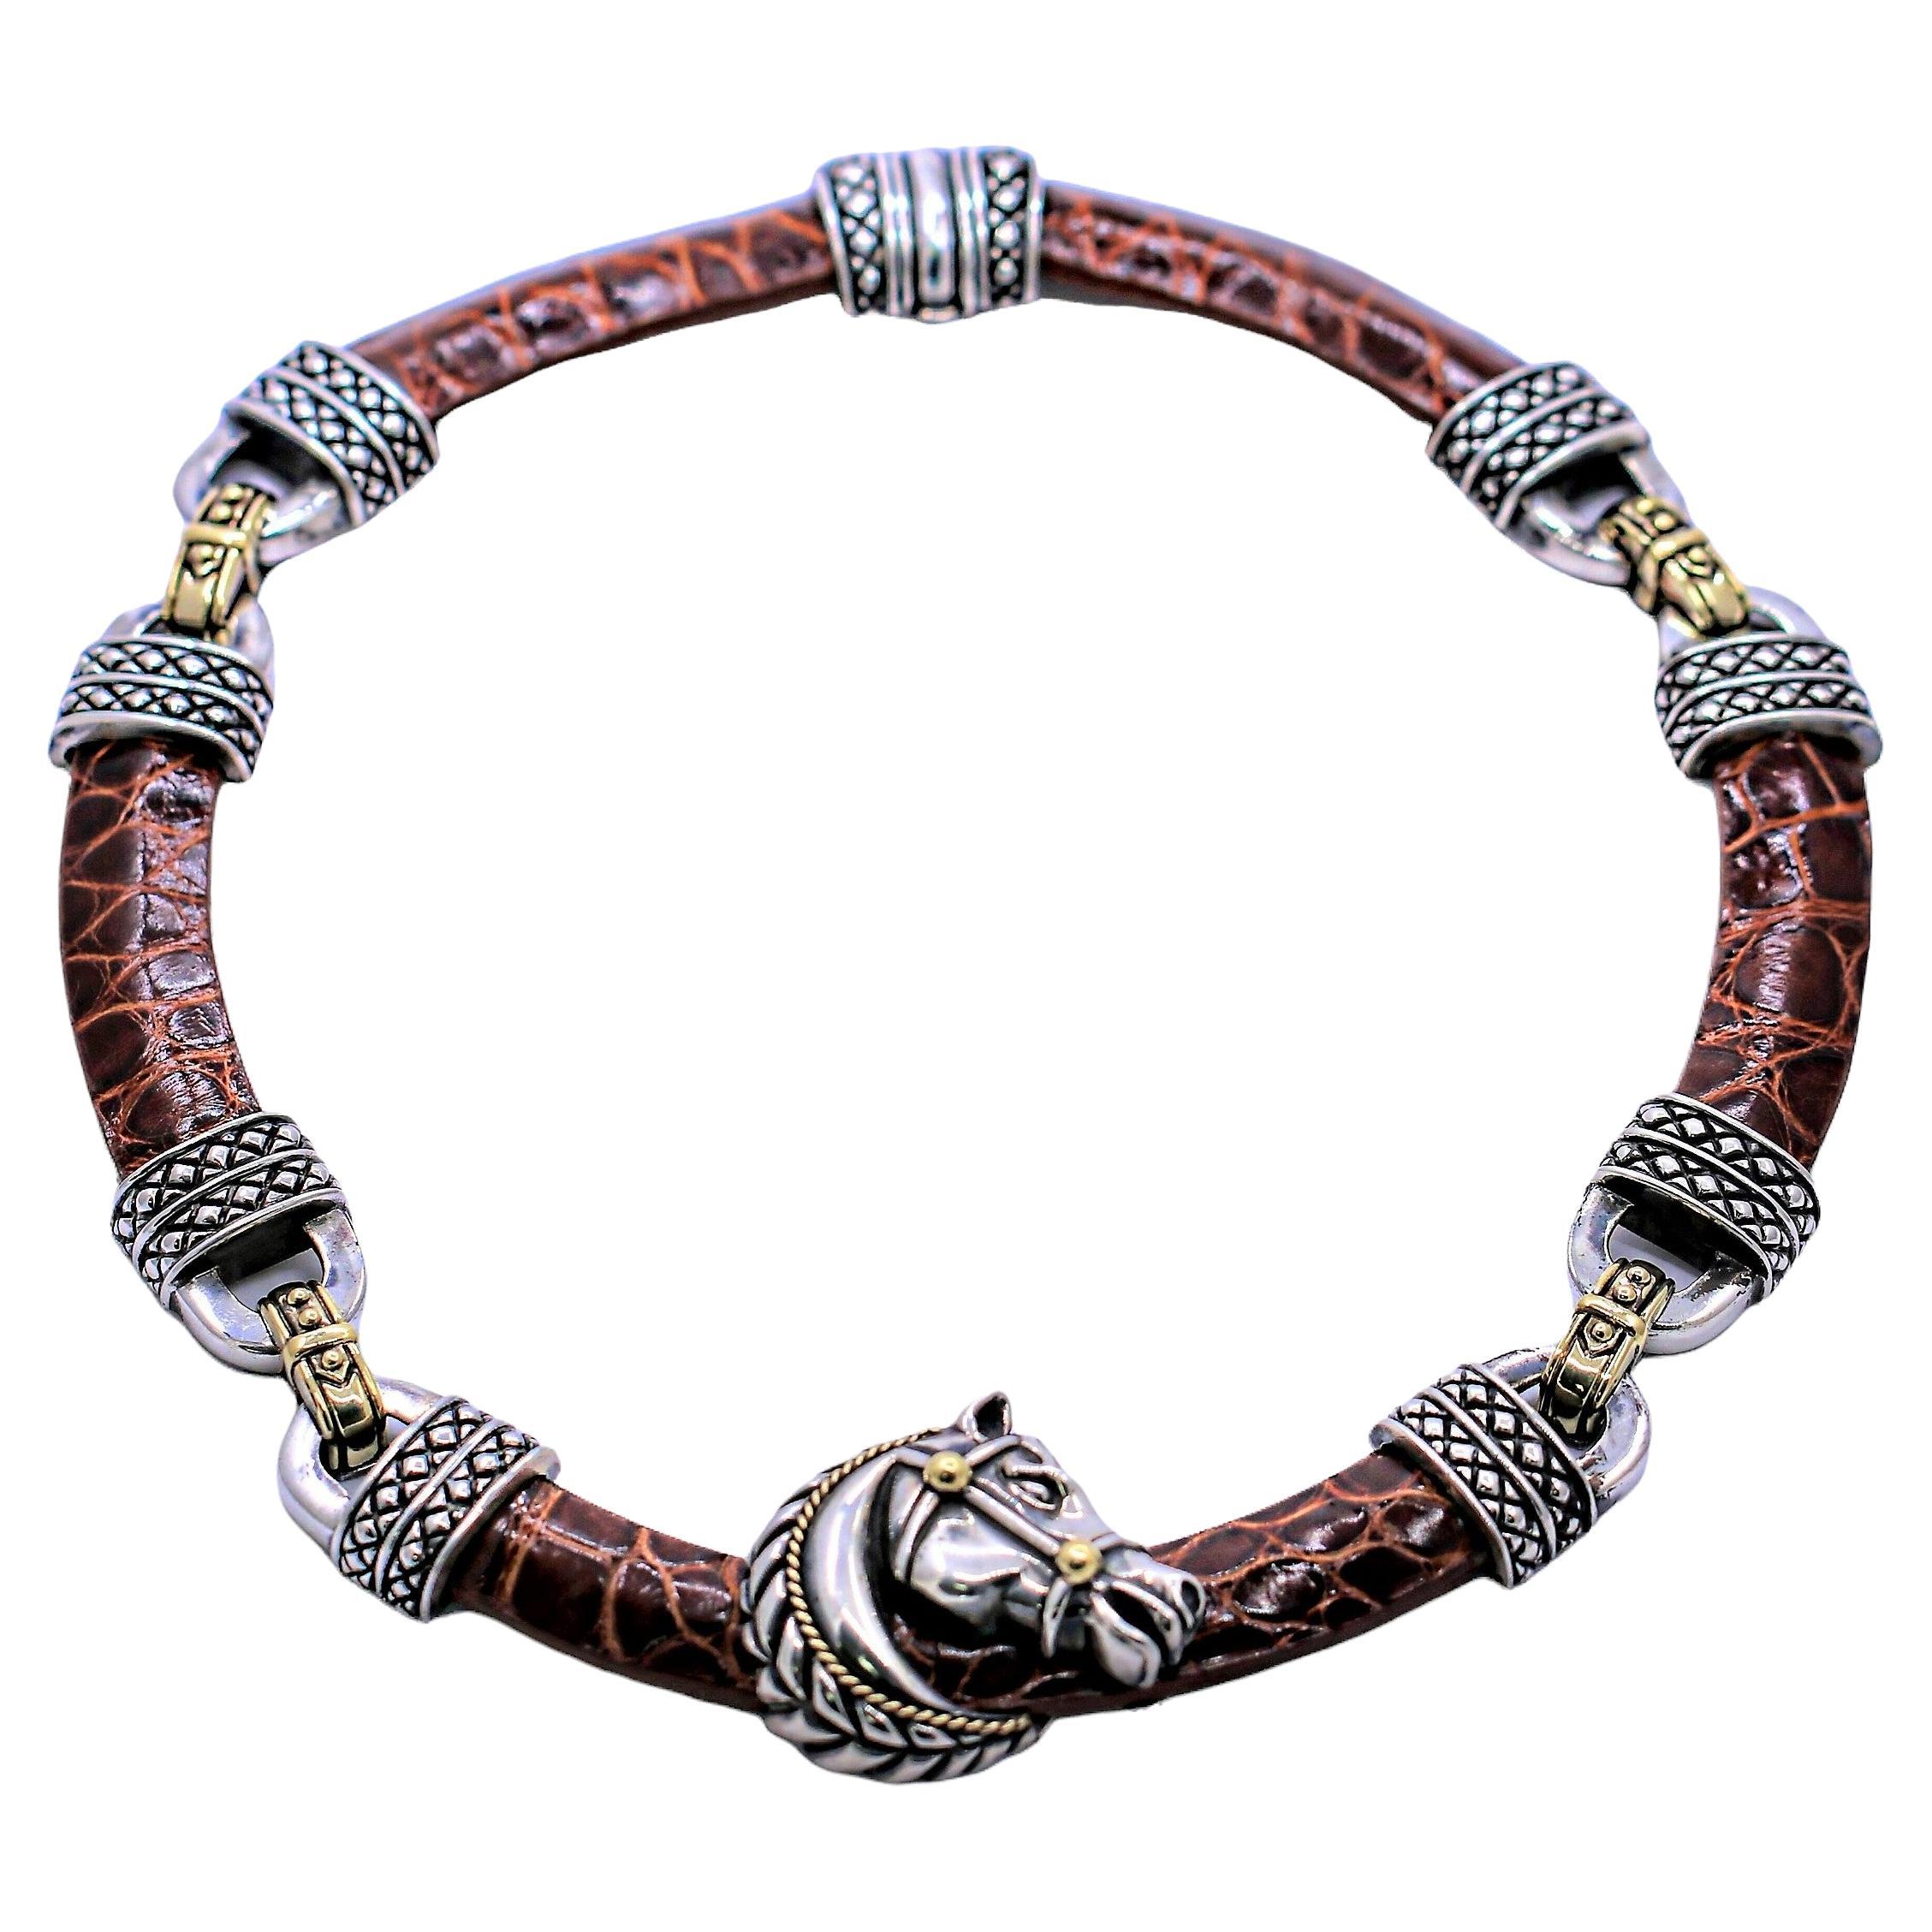 This sporty Nancy and David choker necklace features an intricately detailed horse head in profile, made of sterling silver with 18K gold accents at it's center, and with Equestrian motifs throughout. The horse head measures 1  3/8 inch wide by 1 